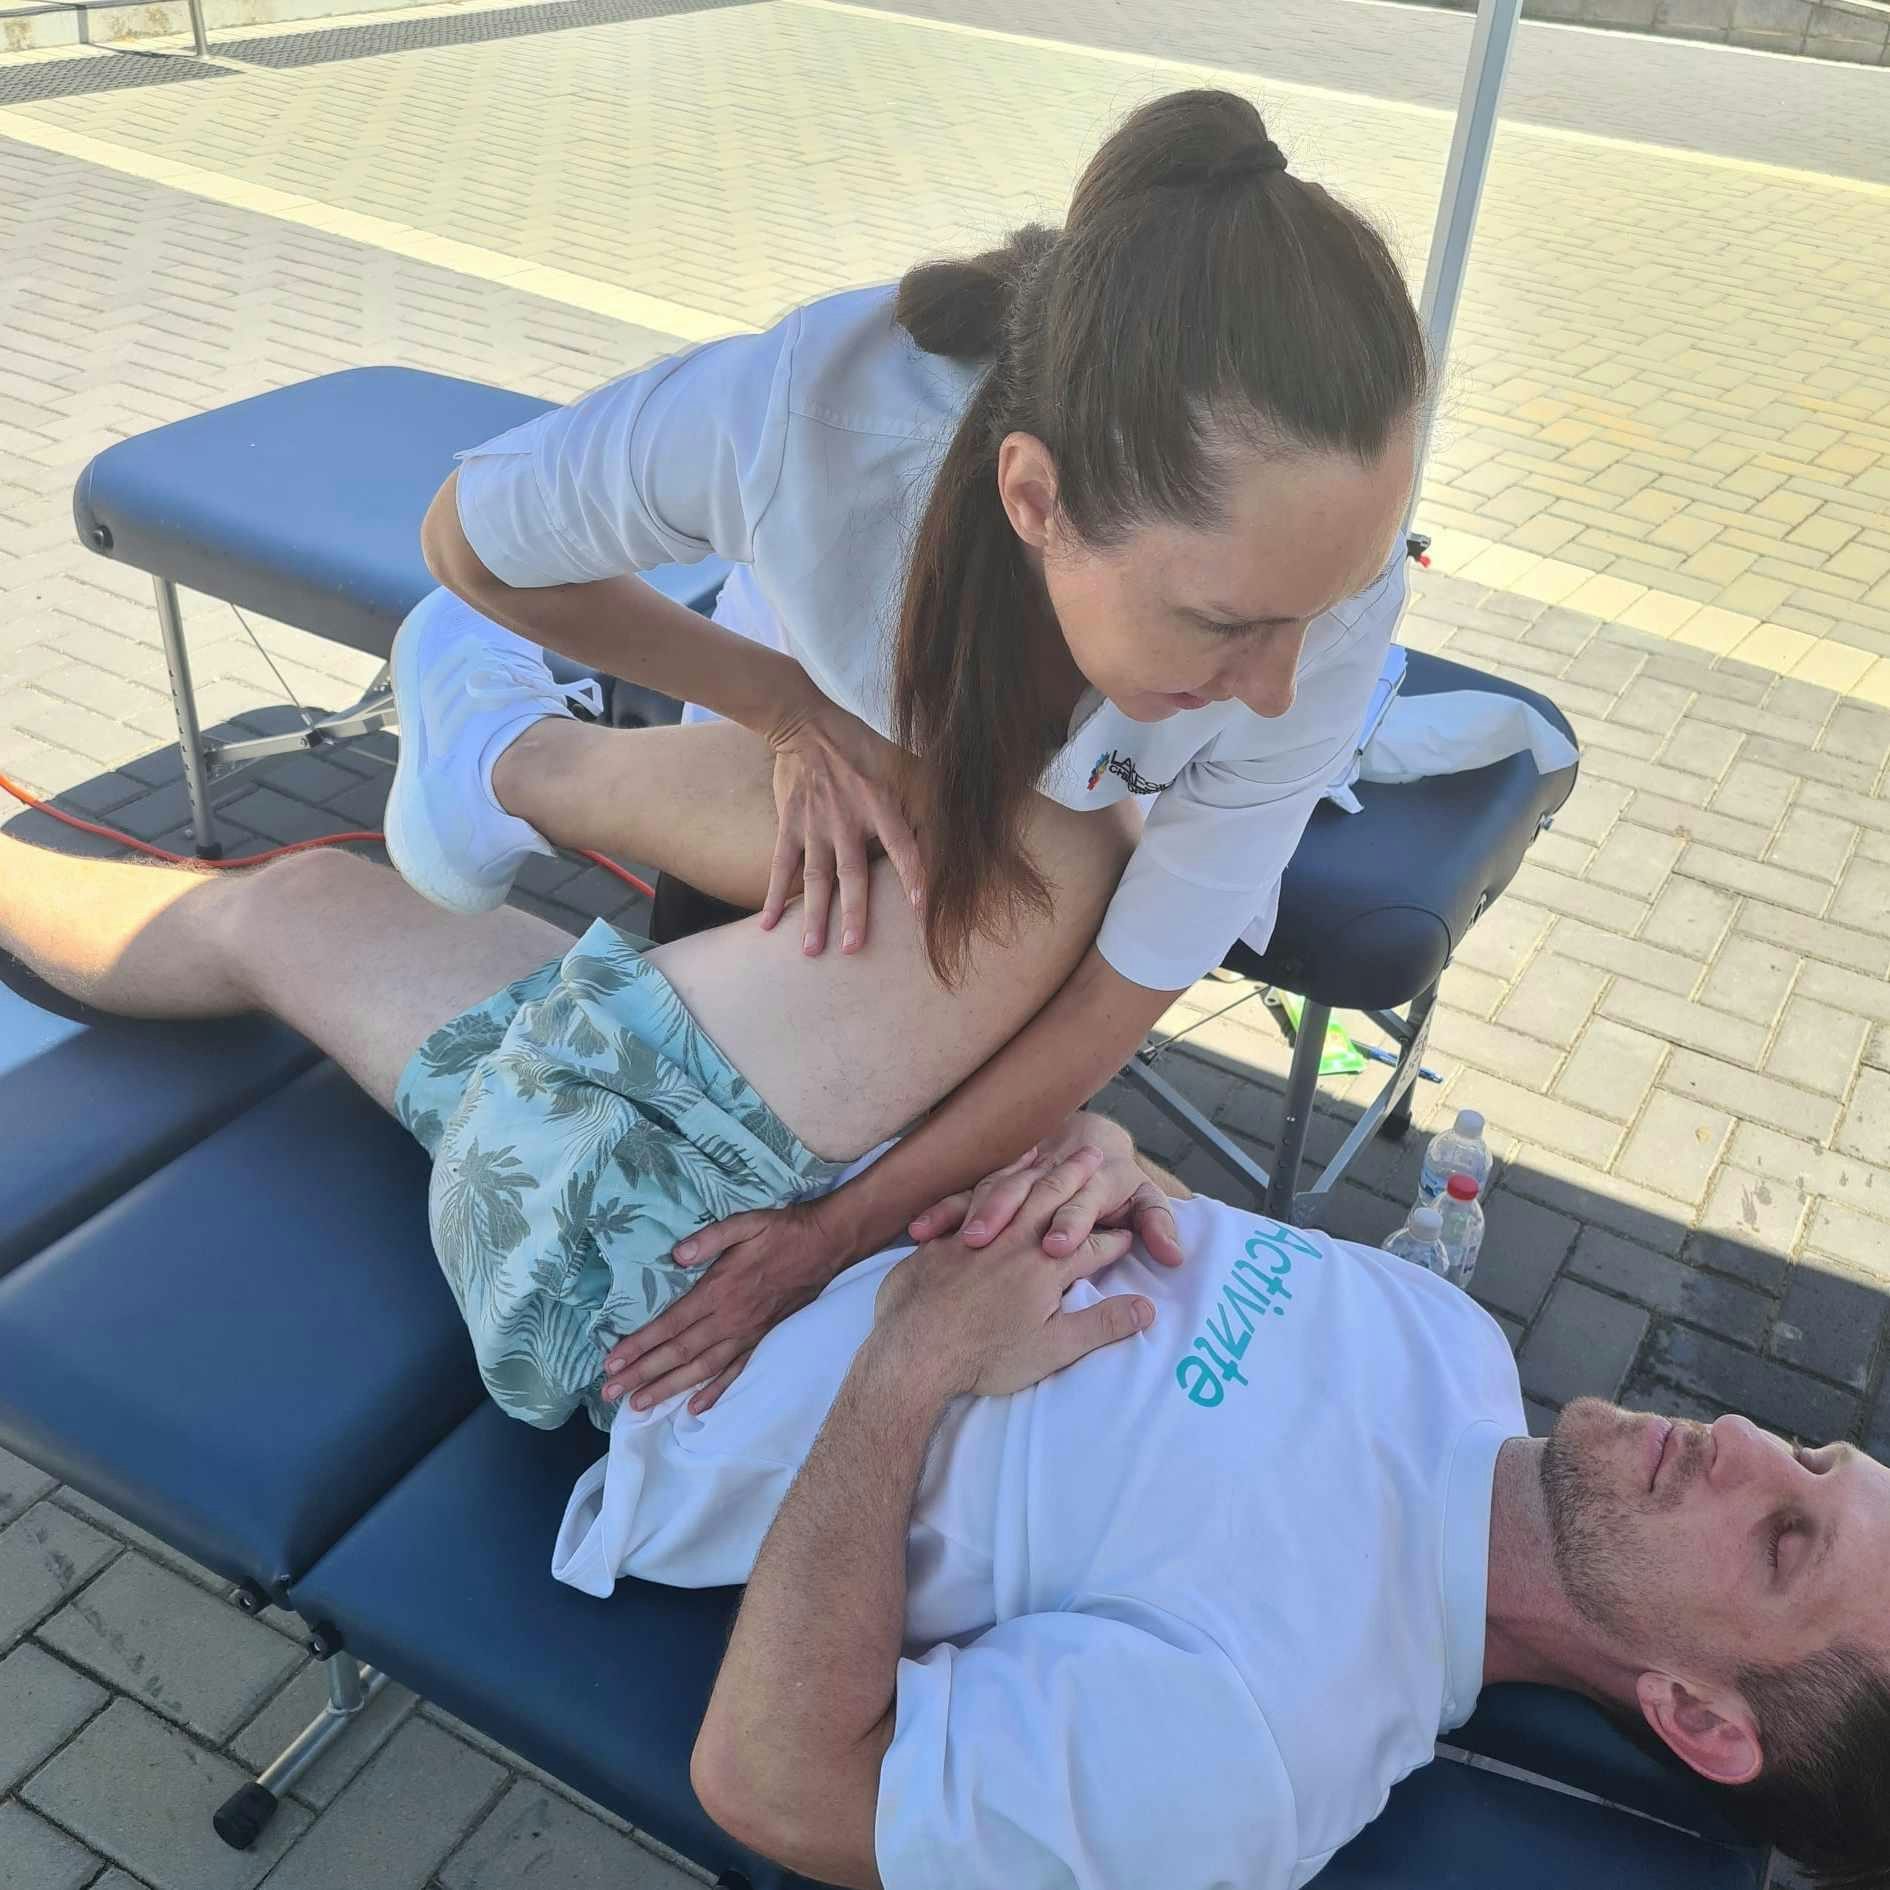 Dr. Linda Schiller providing chiropractic care to athlete at FitSpot event in Joondalup